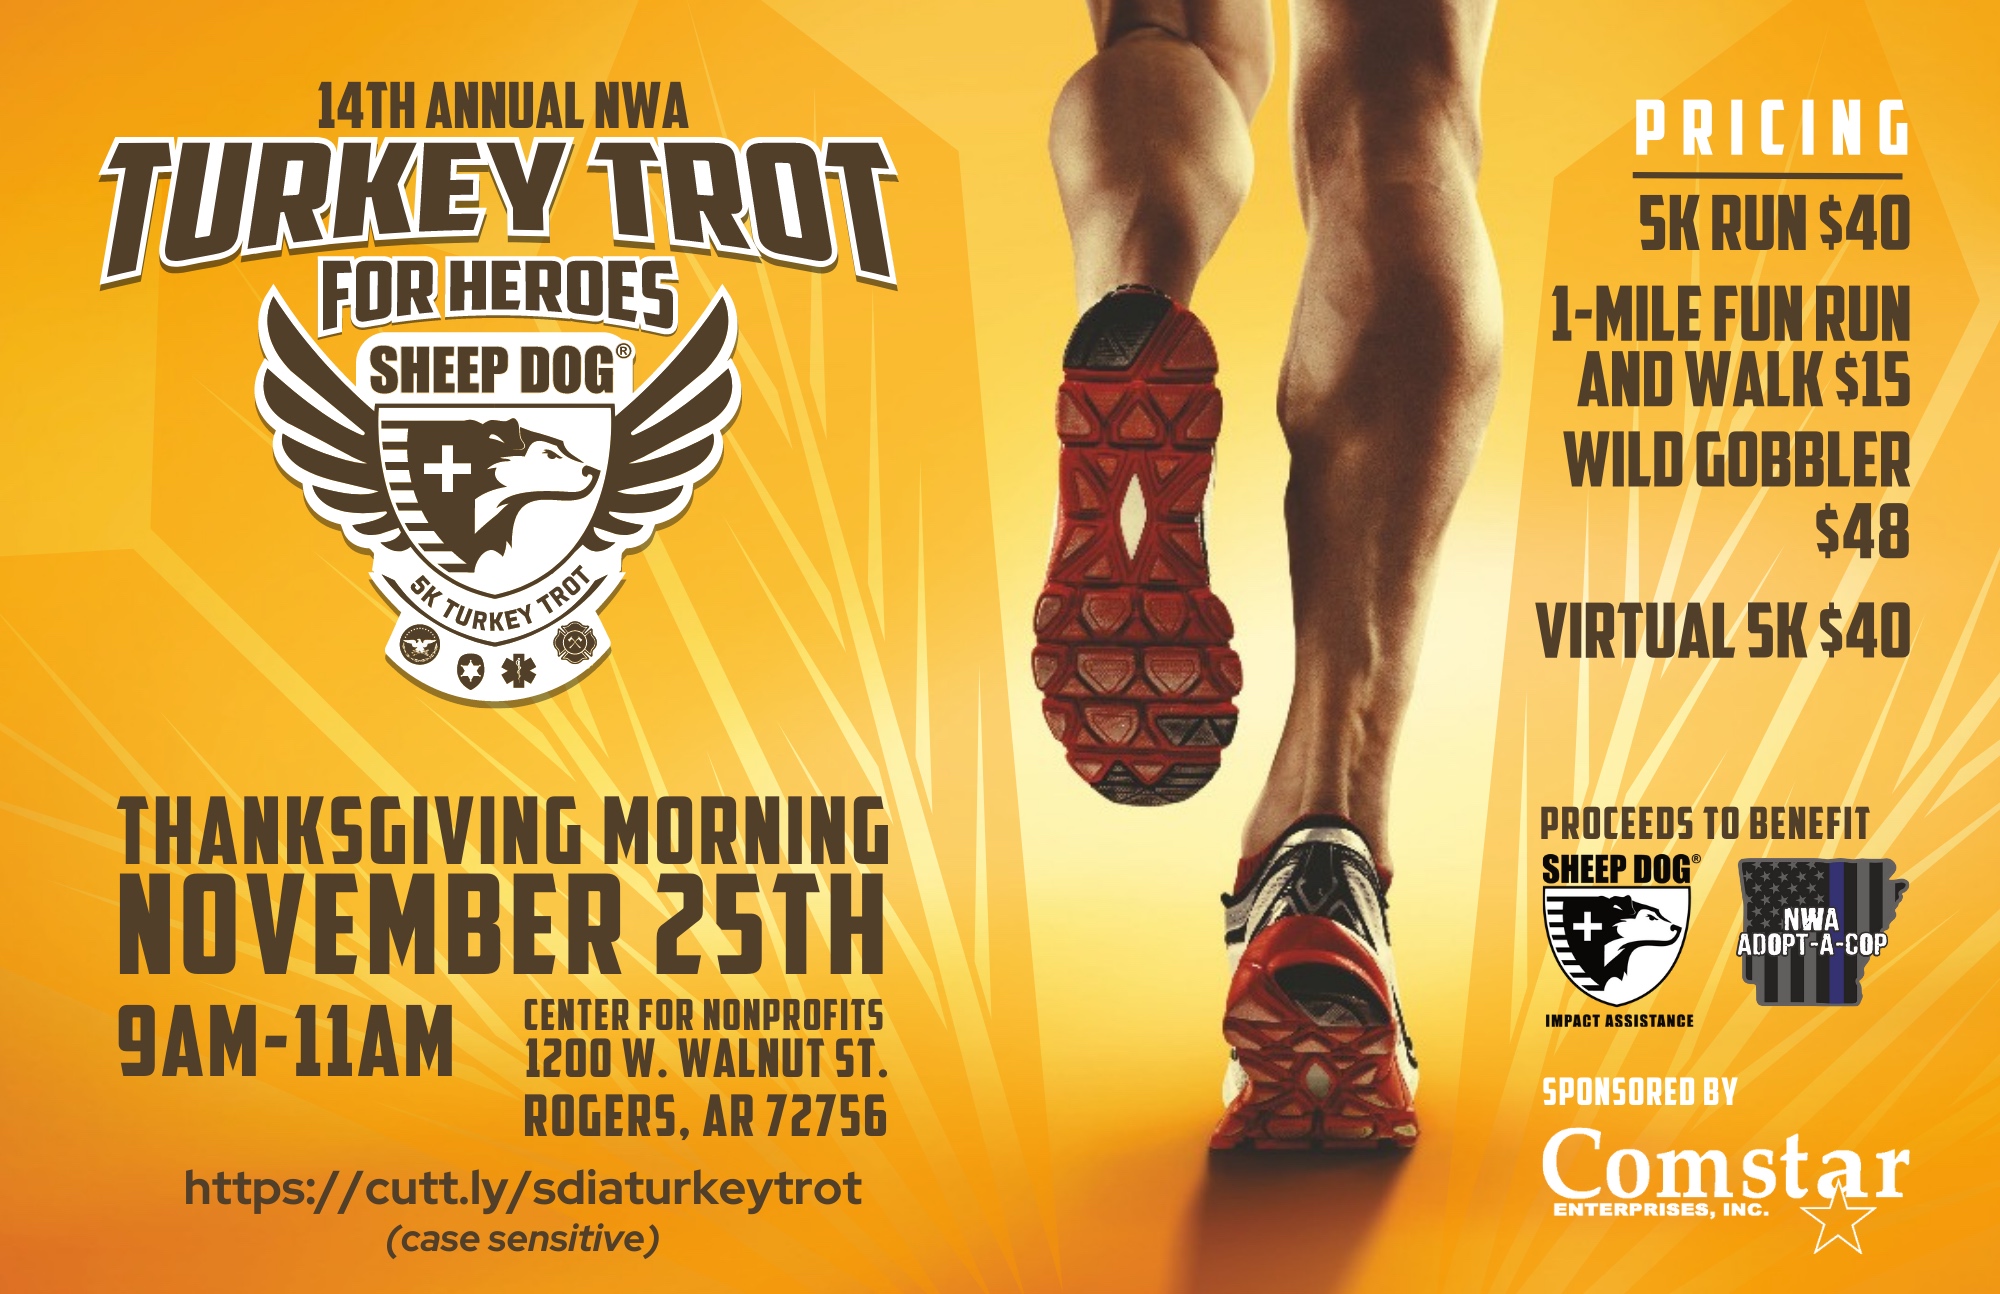 14th Annual Turkey Trot for Heroes is ONE WEEK AWAY!